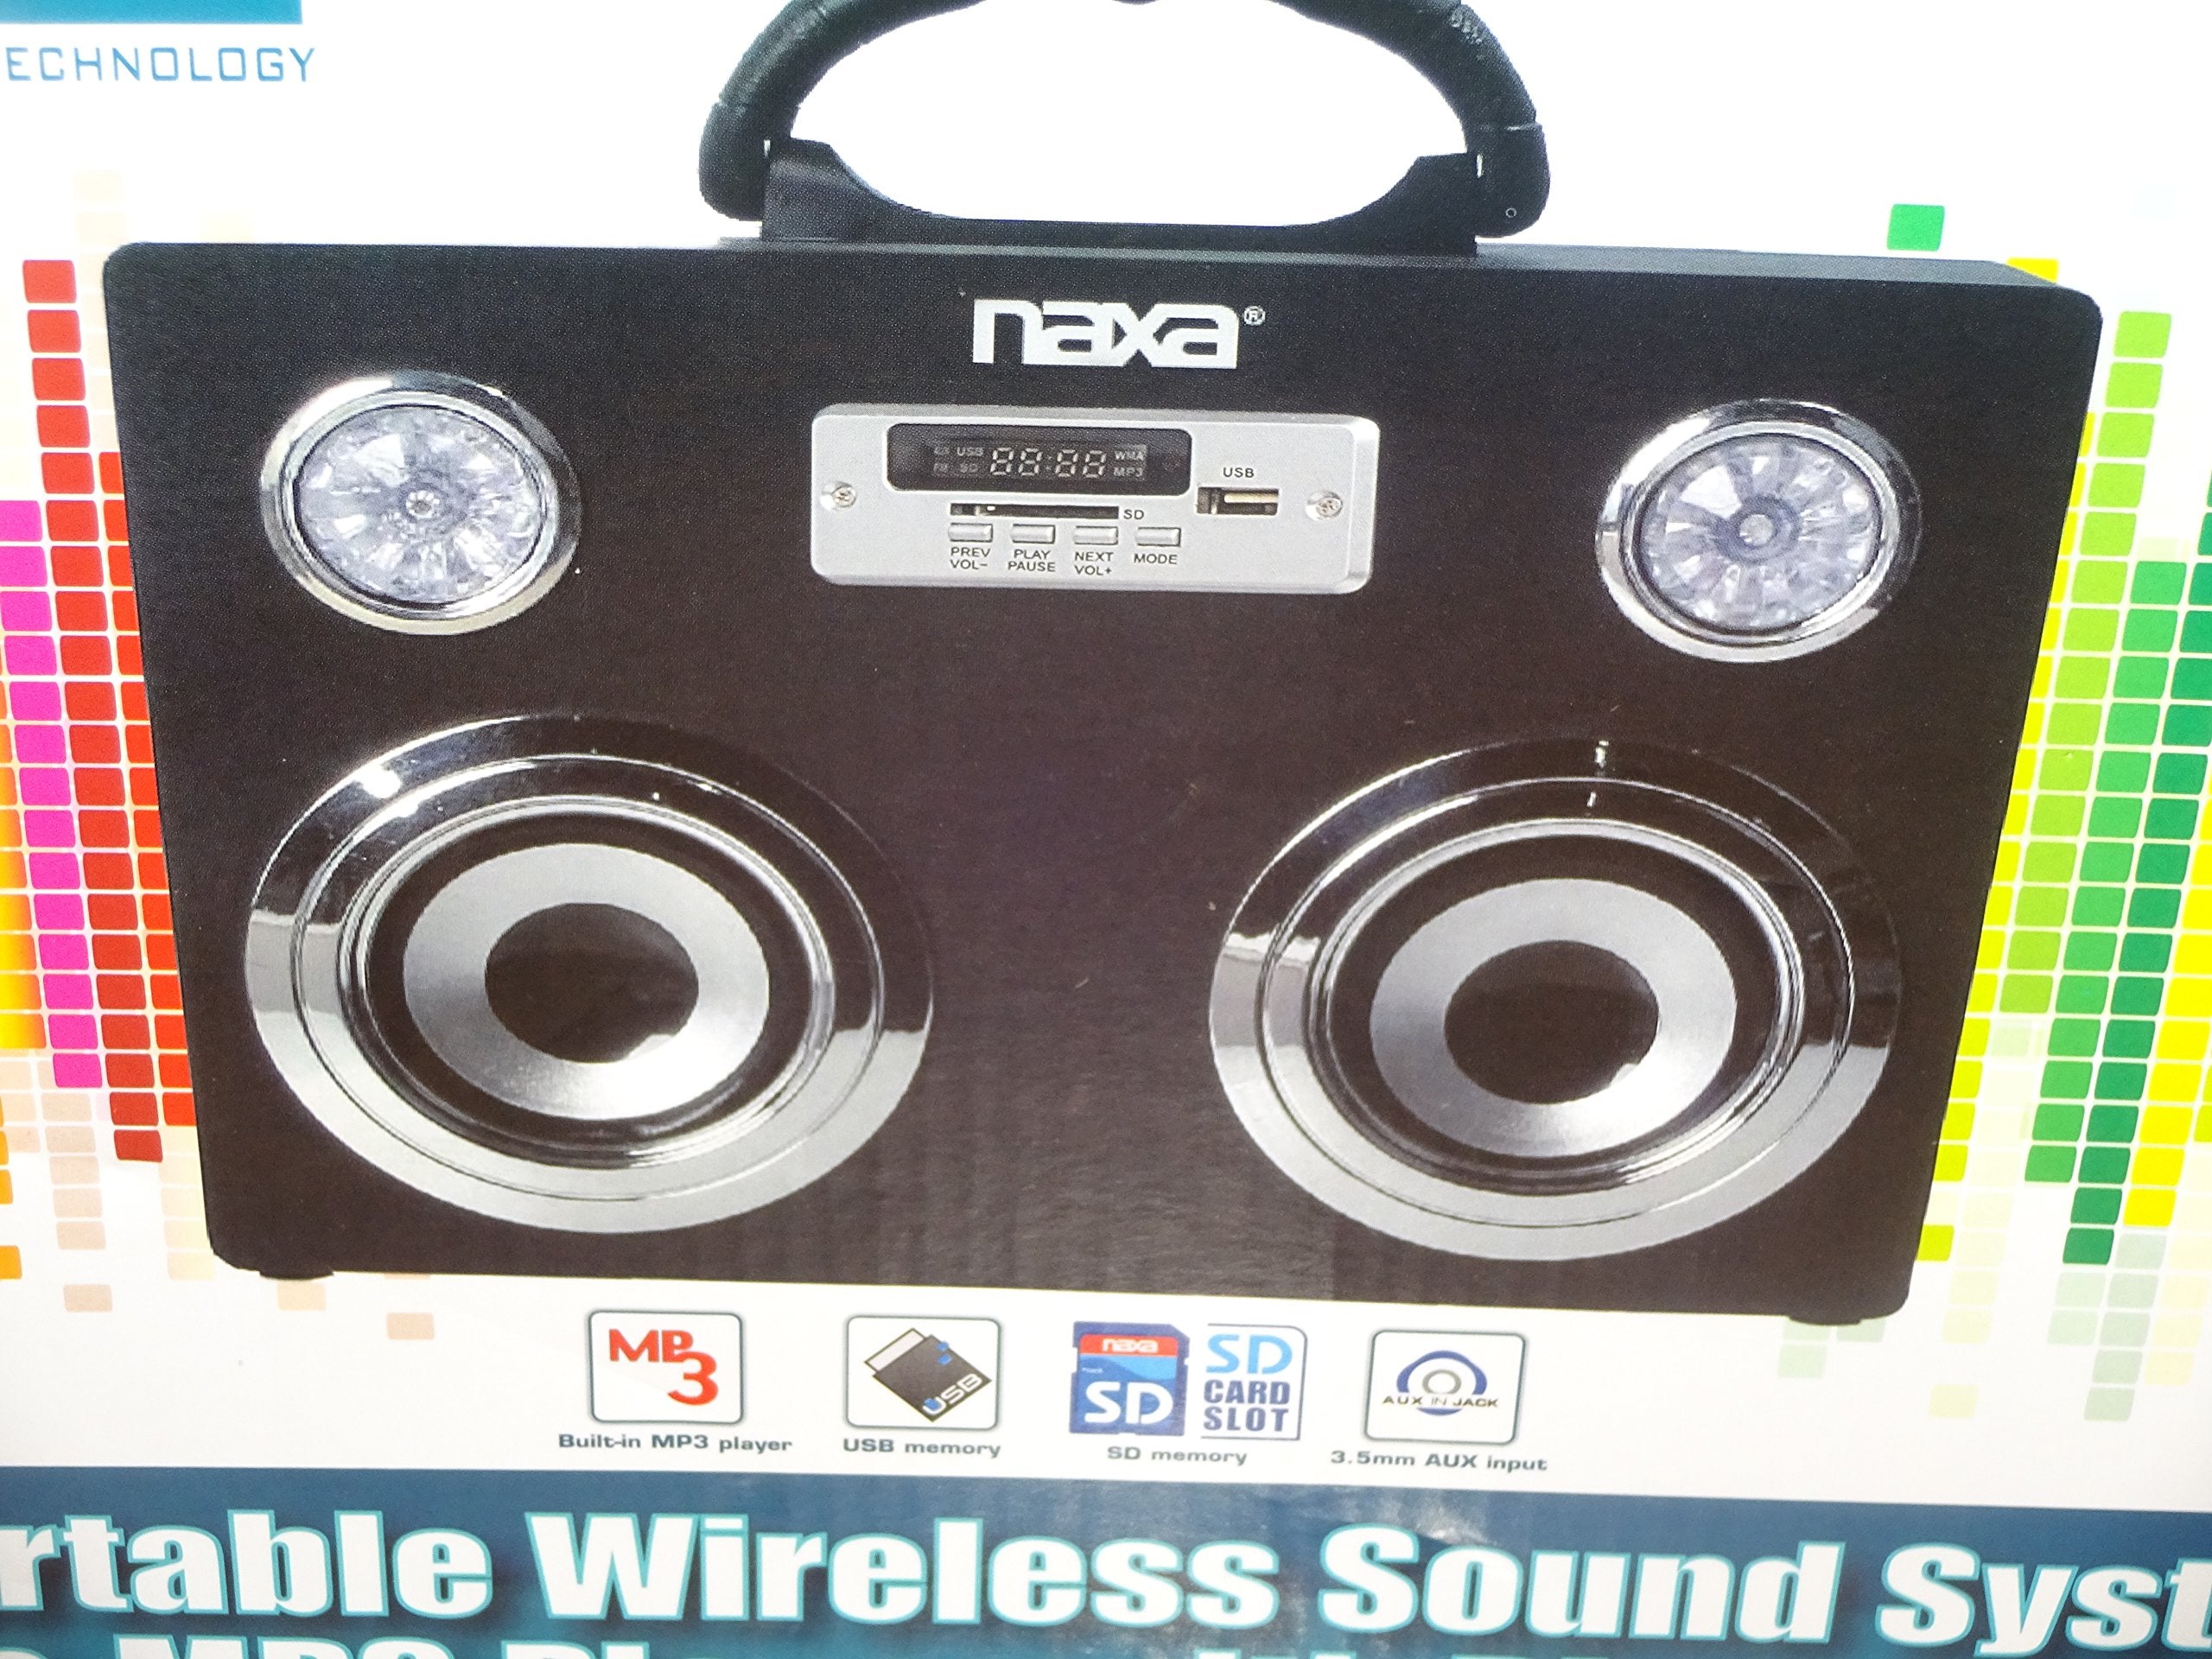 NAXA Electronics Portable Wireless Sound System and MP3 Player with Bluetooth  - Like New